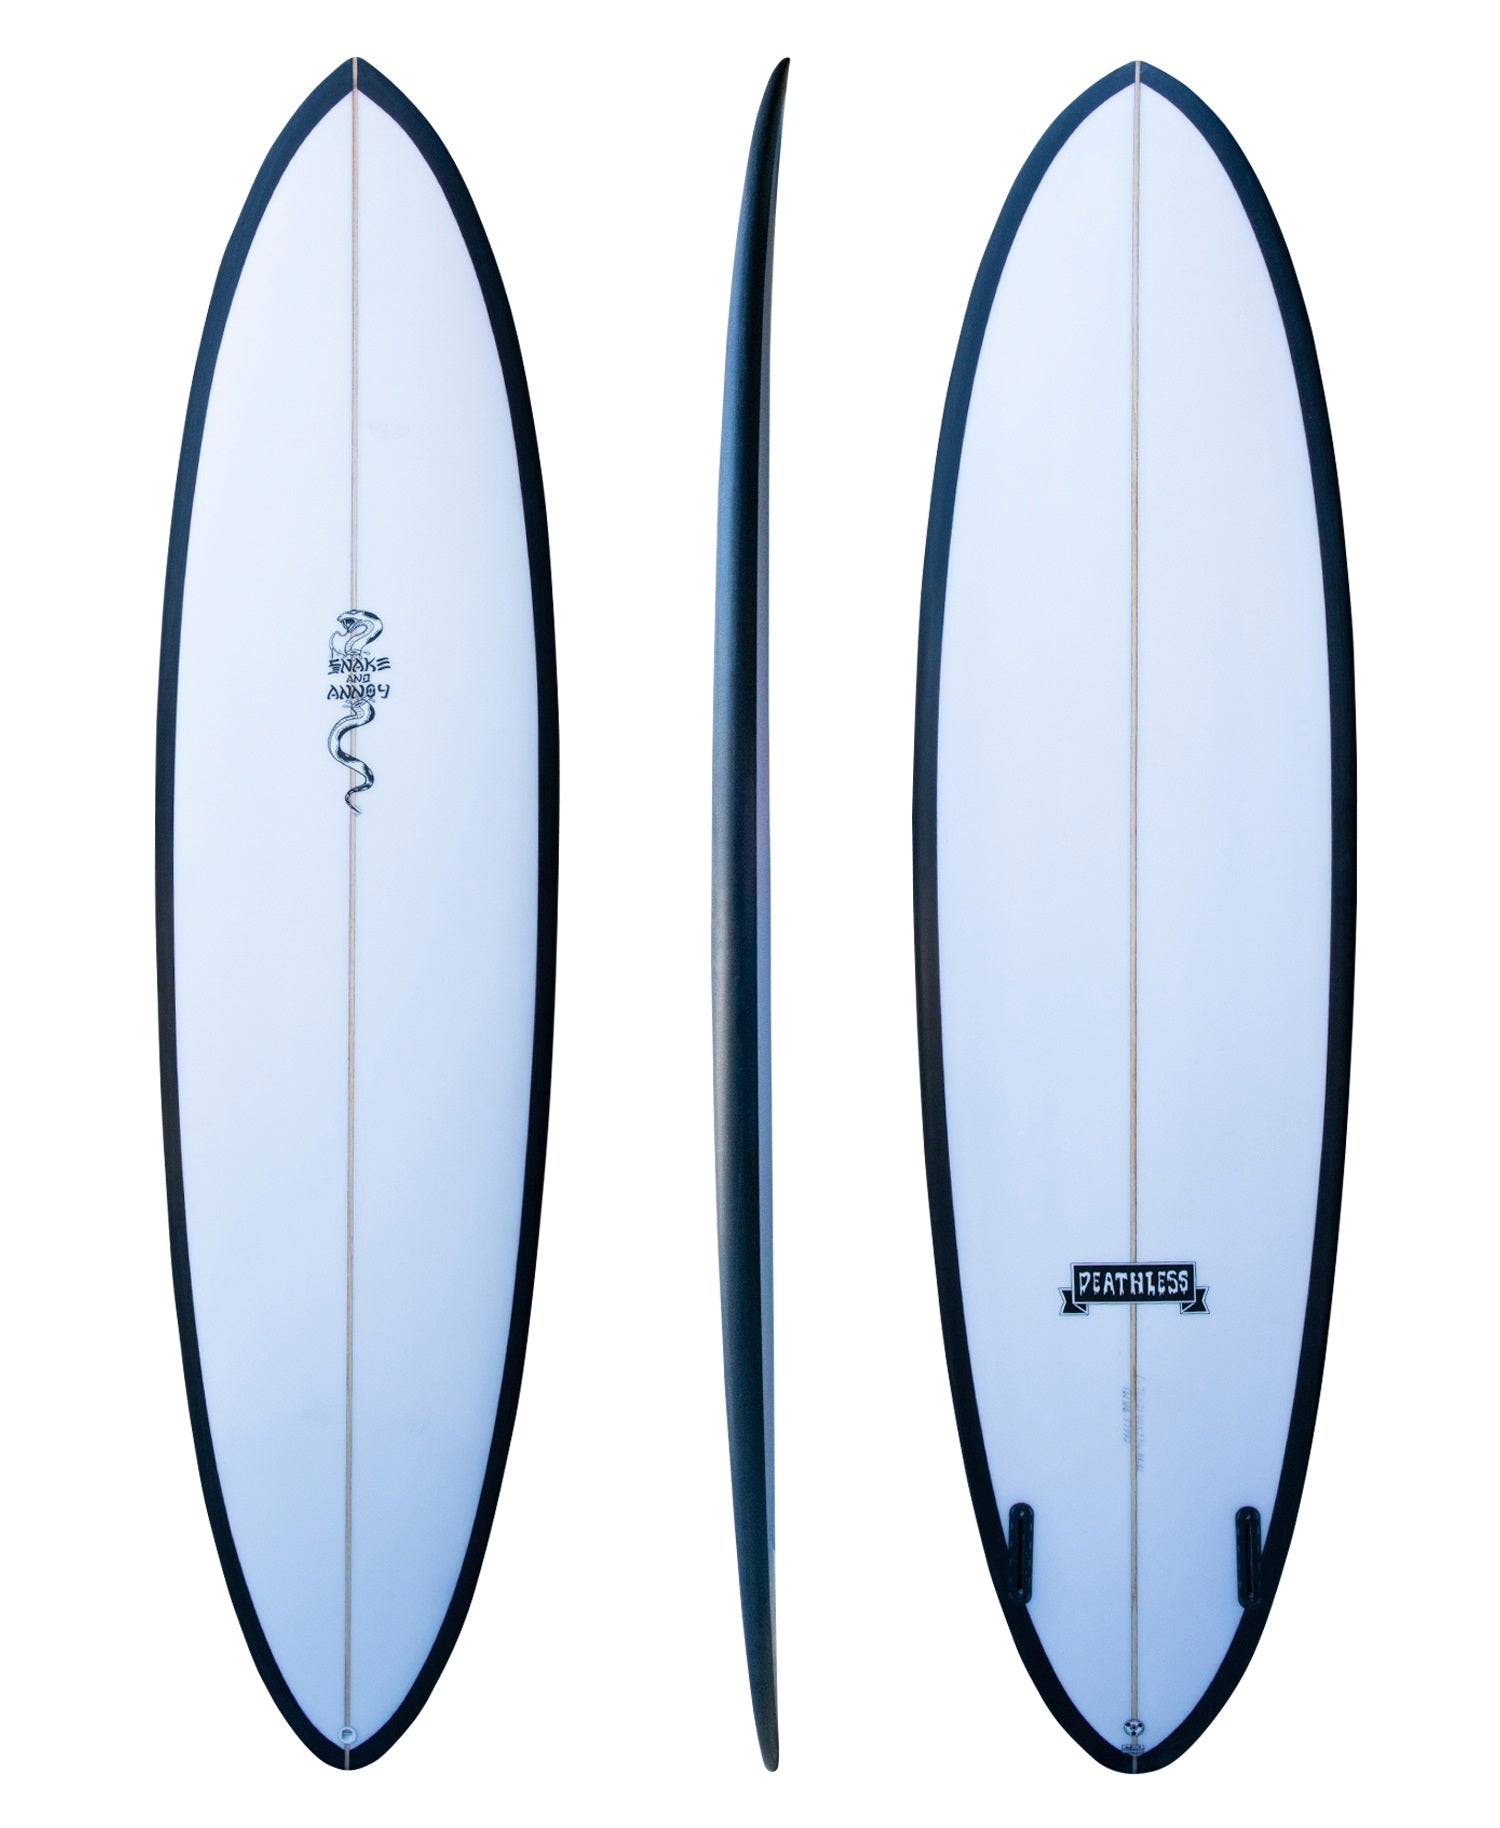 DEATHLESS 'SNAKE & ANNOY' TWIN FIN SURFBOARD